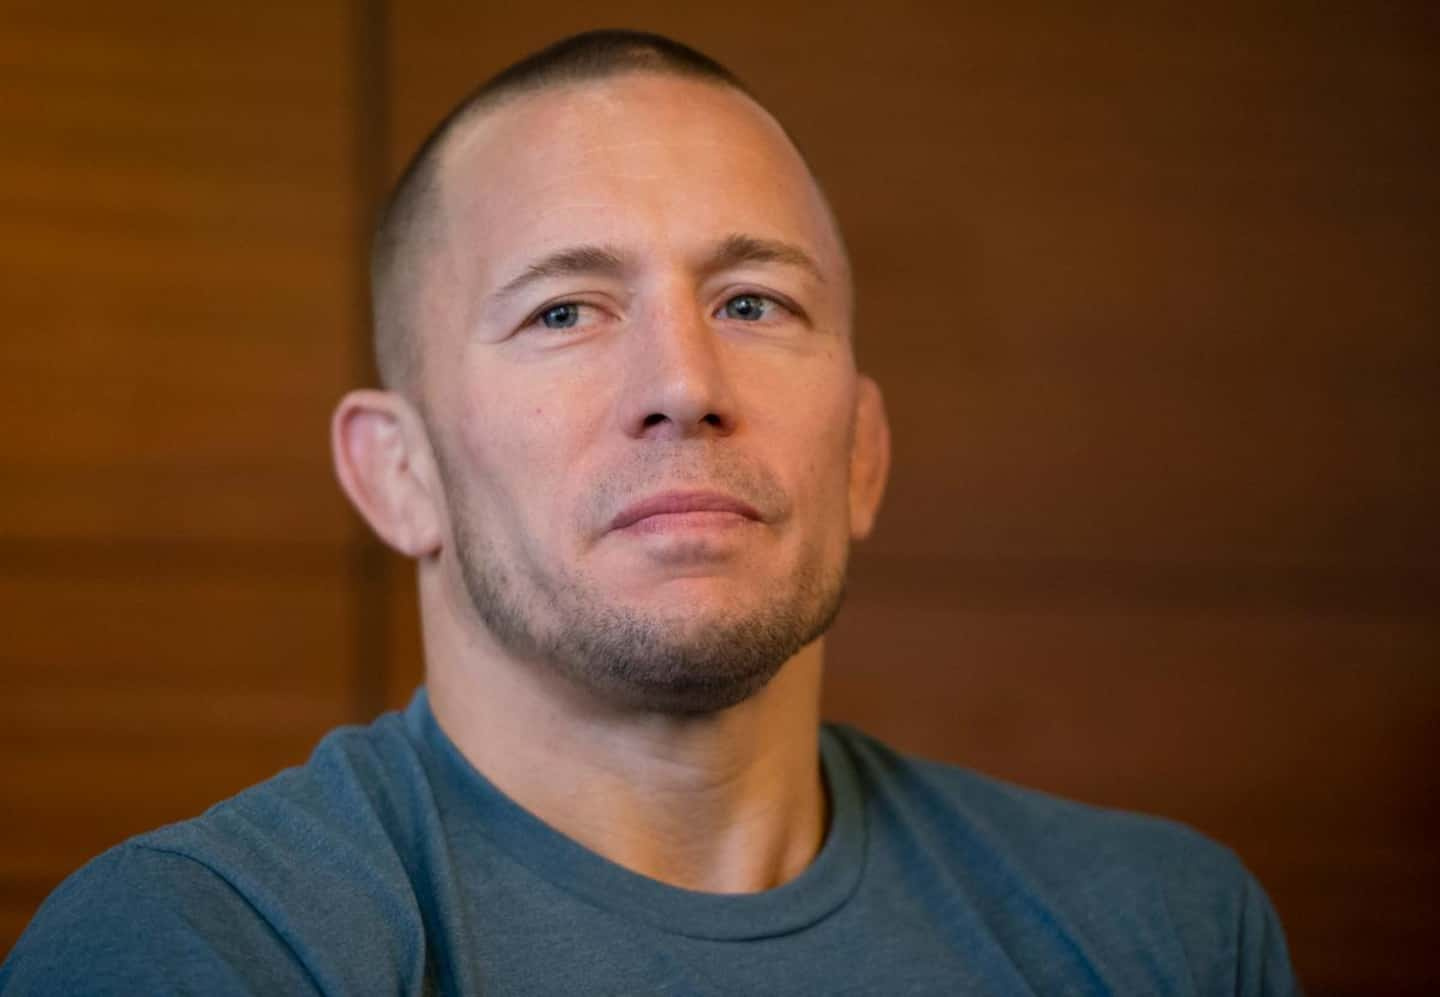 “GSP” will not return to the octagon